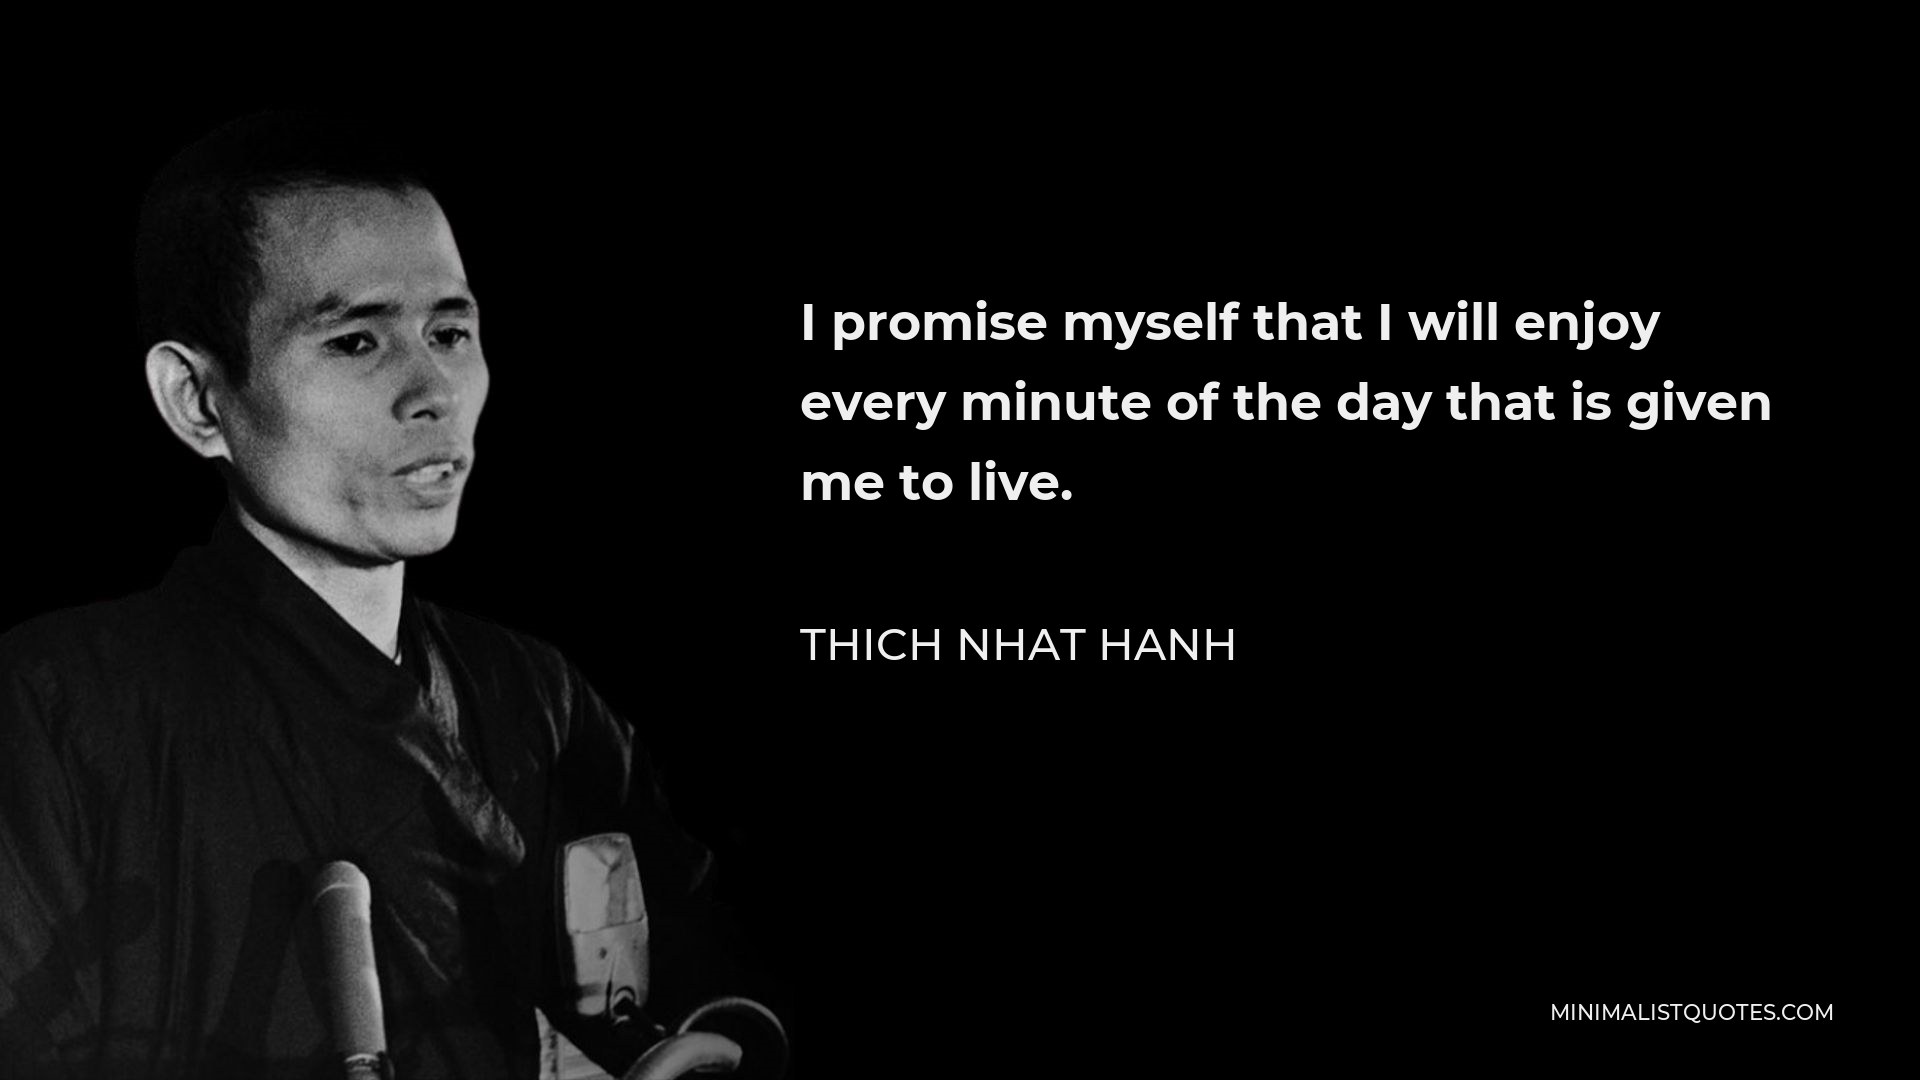 Thich Nhat Hanh Quote - I promise myself that I will enjoy every minute of the day that is given me to live.